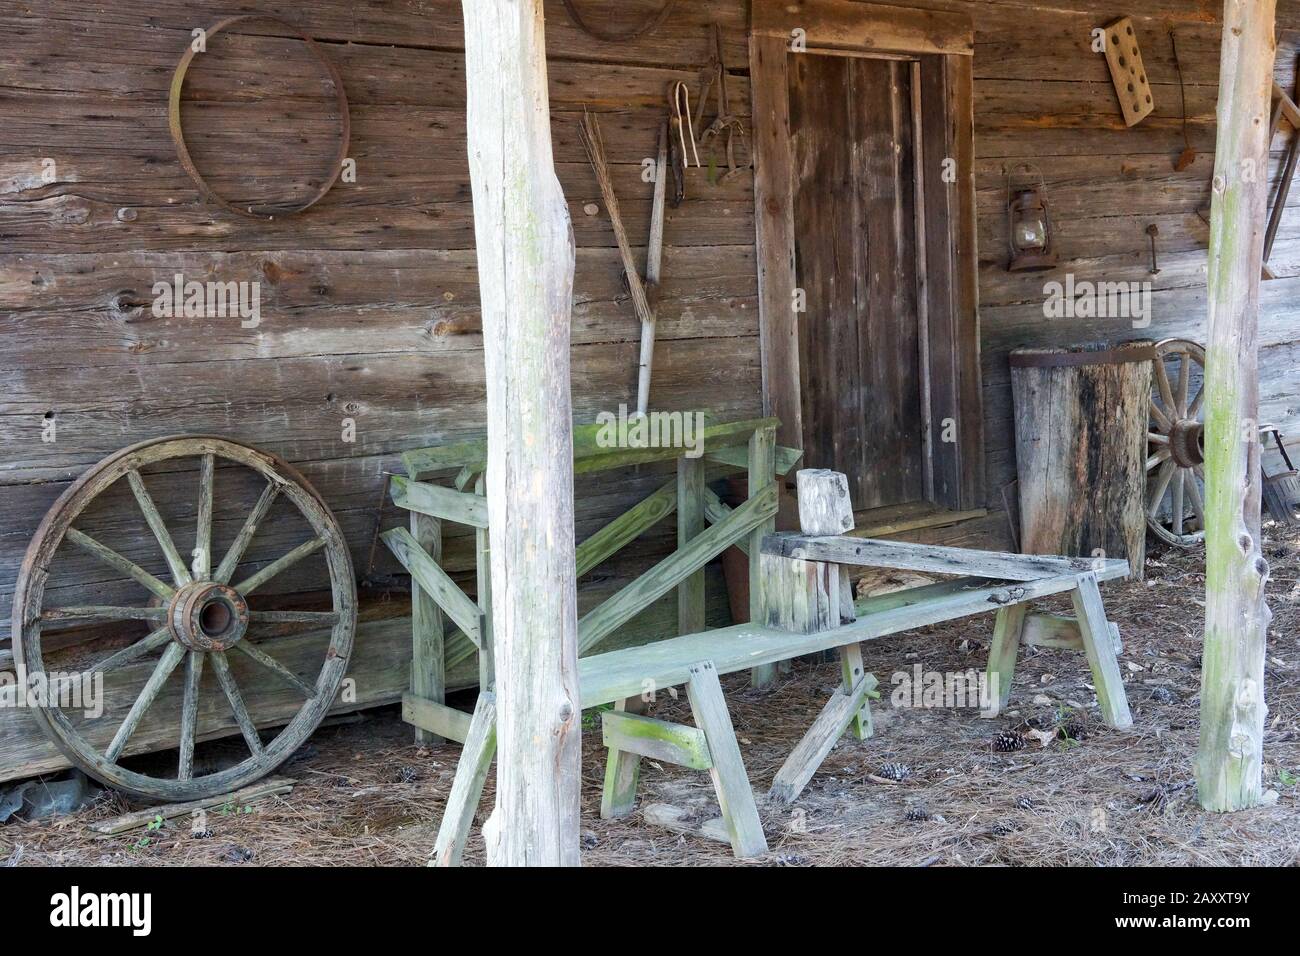 Wooden bench and wheel on the front porch of an old log house in Washington, Georgia. This log house was built in the pioneer days of America. Stock Photo